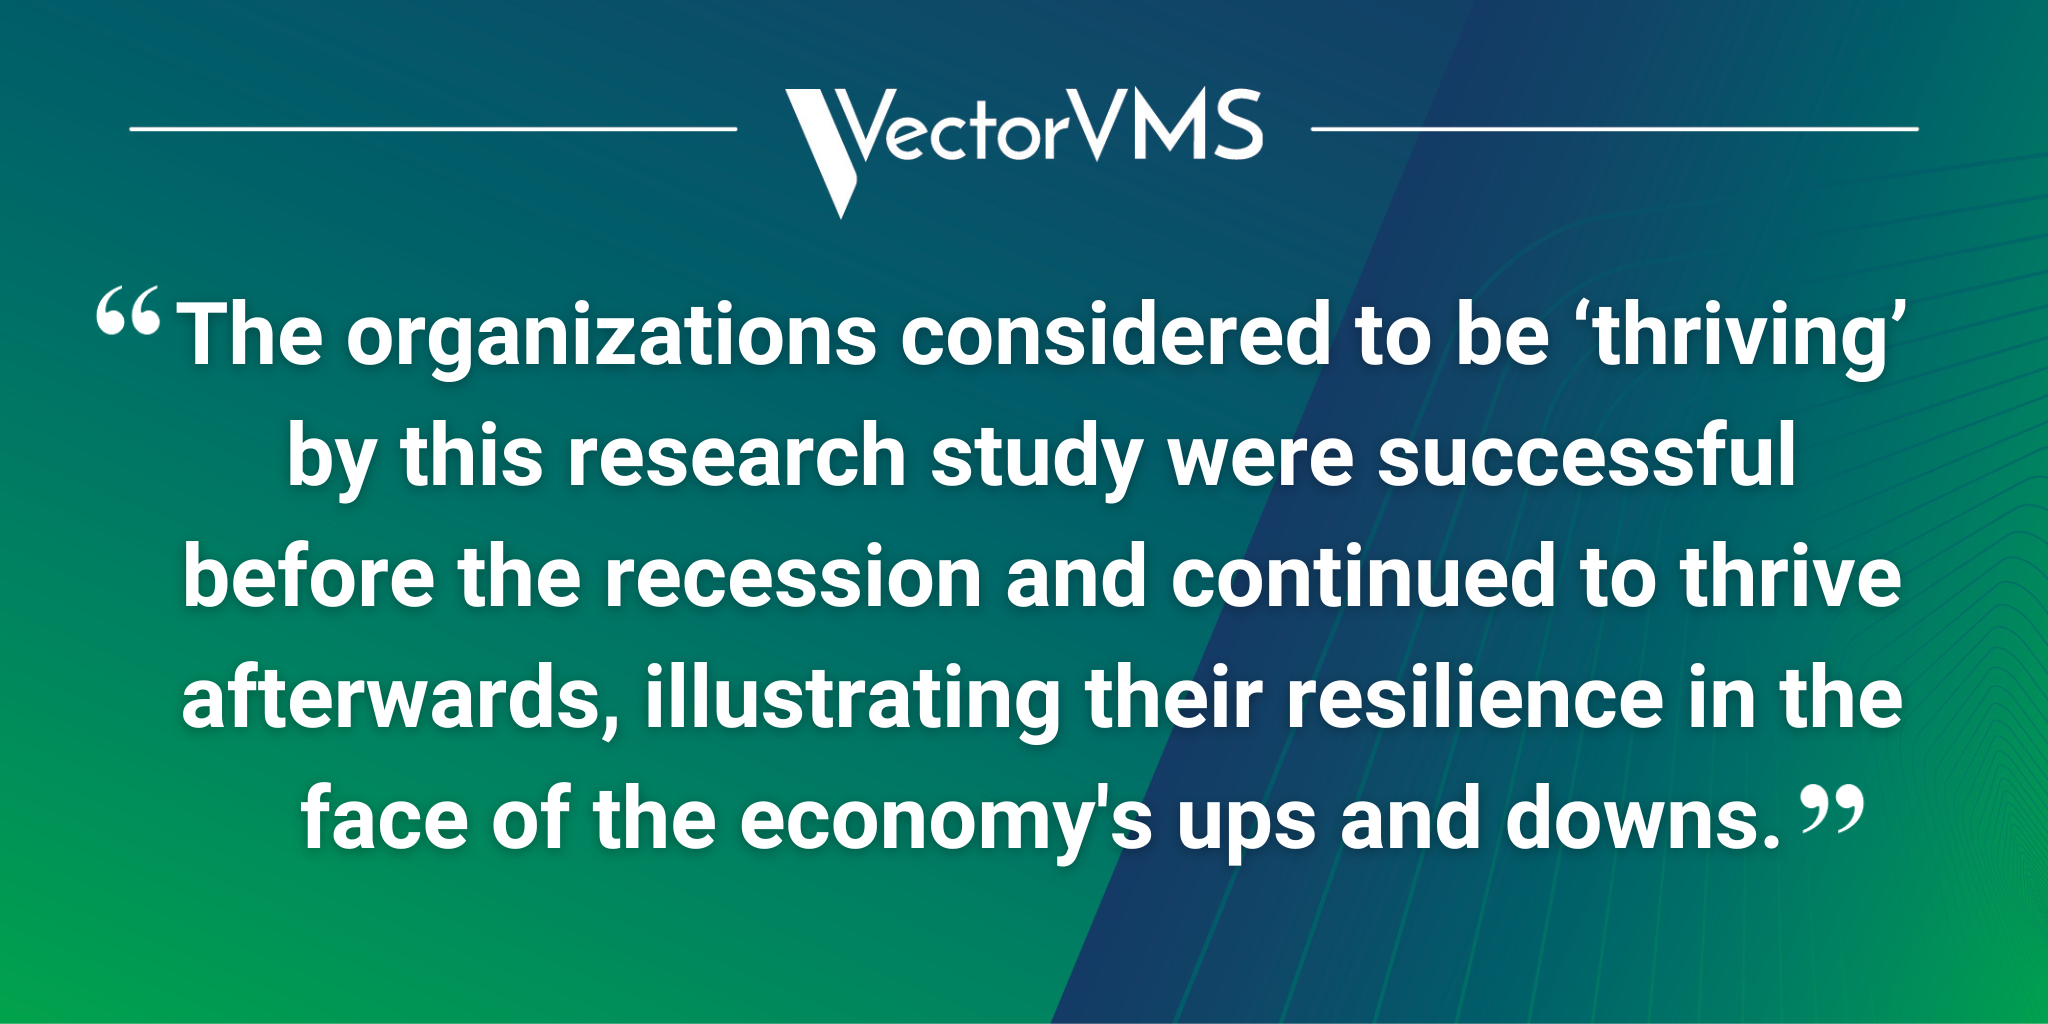 The organizations considered to be ‘thriving’ by this research study were successful before the recession and continued to thrive afterwards, illustrating their resilience in the face of the economy's ups and downs.